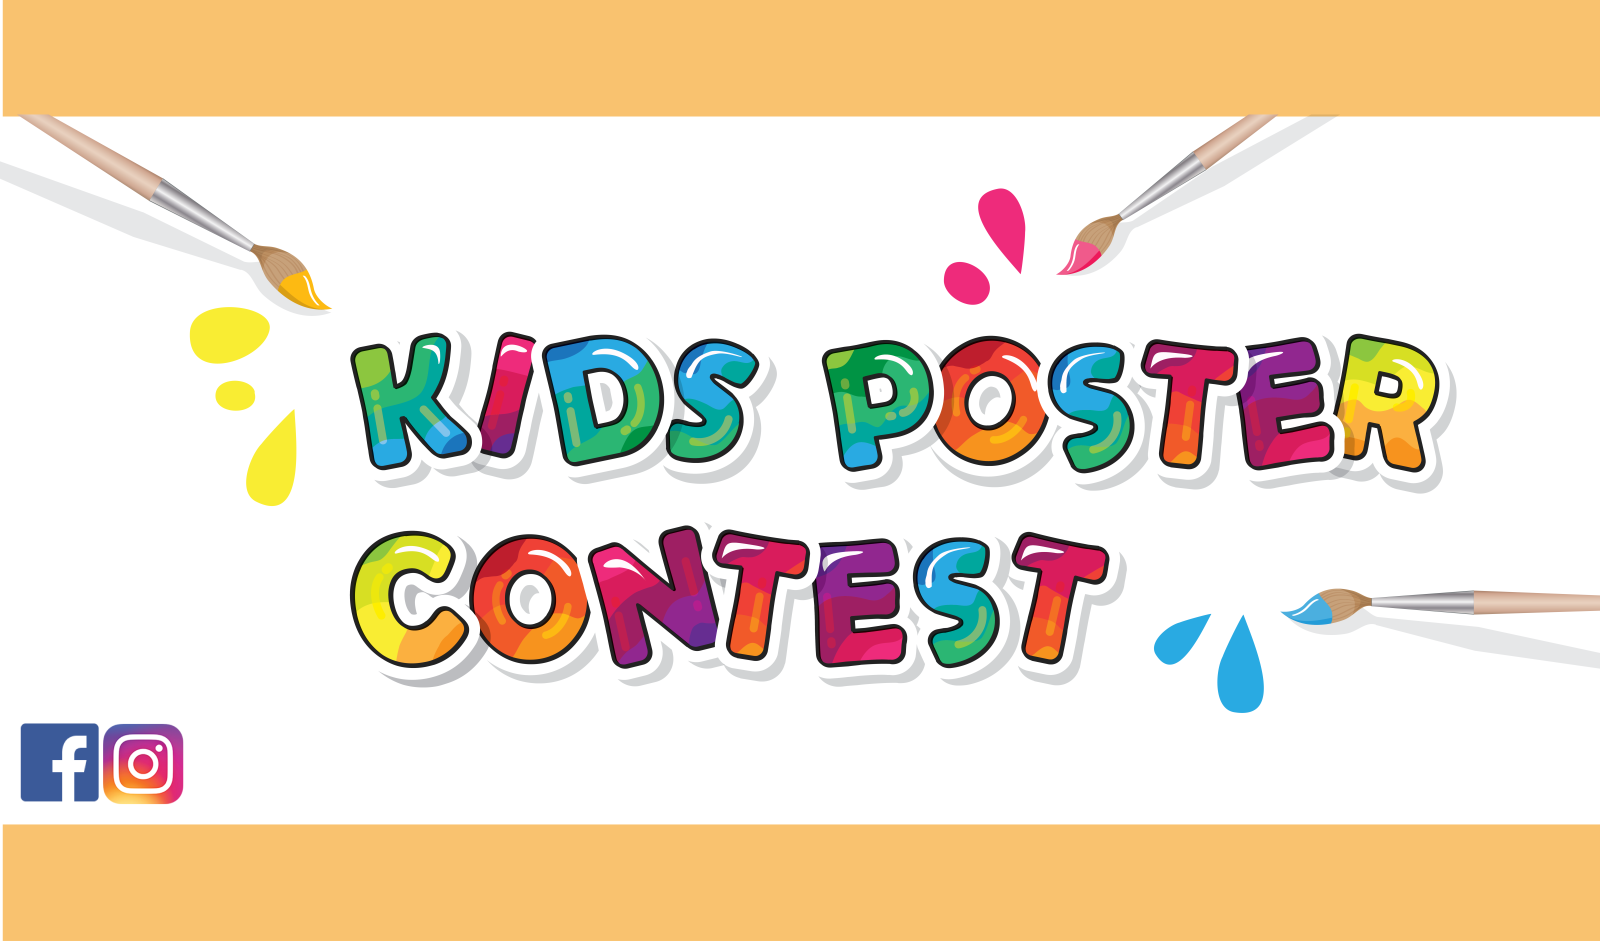 Kids Poster Contest